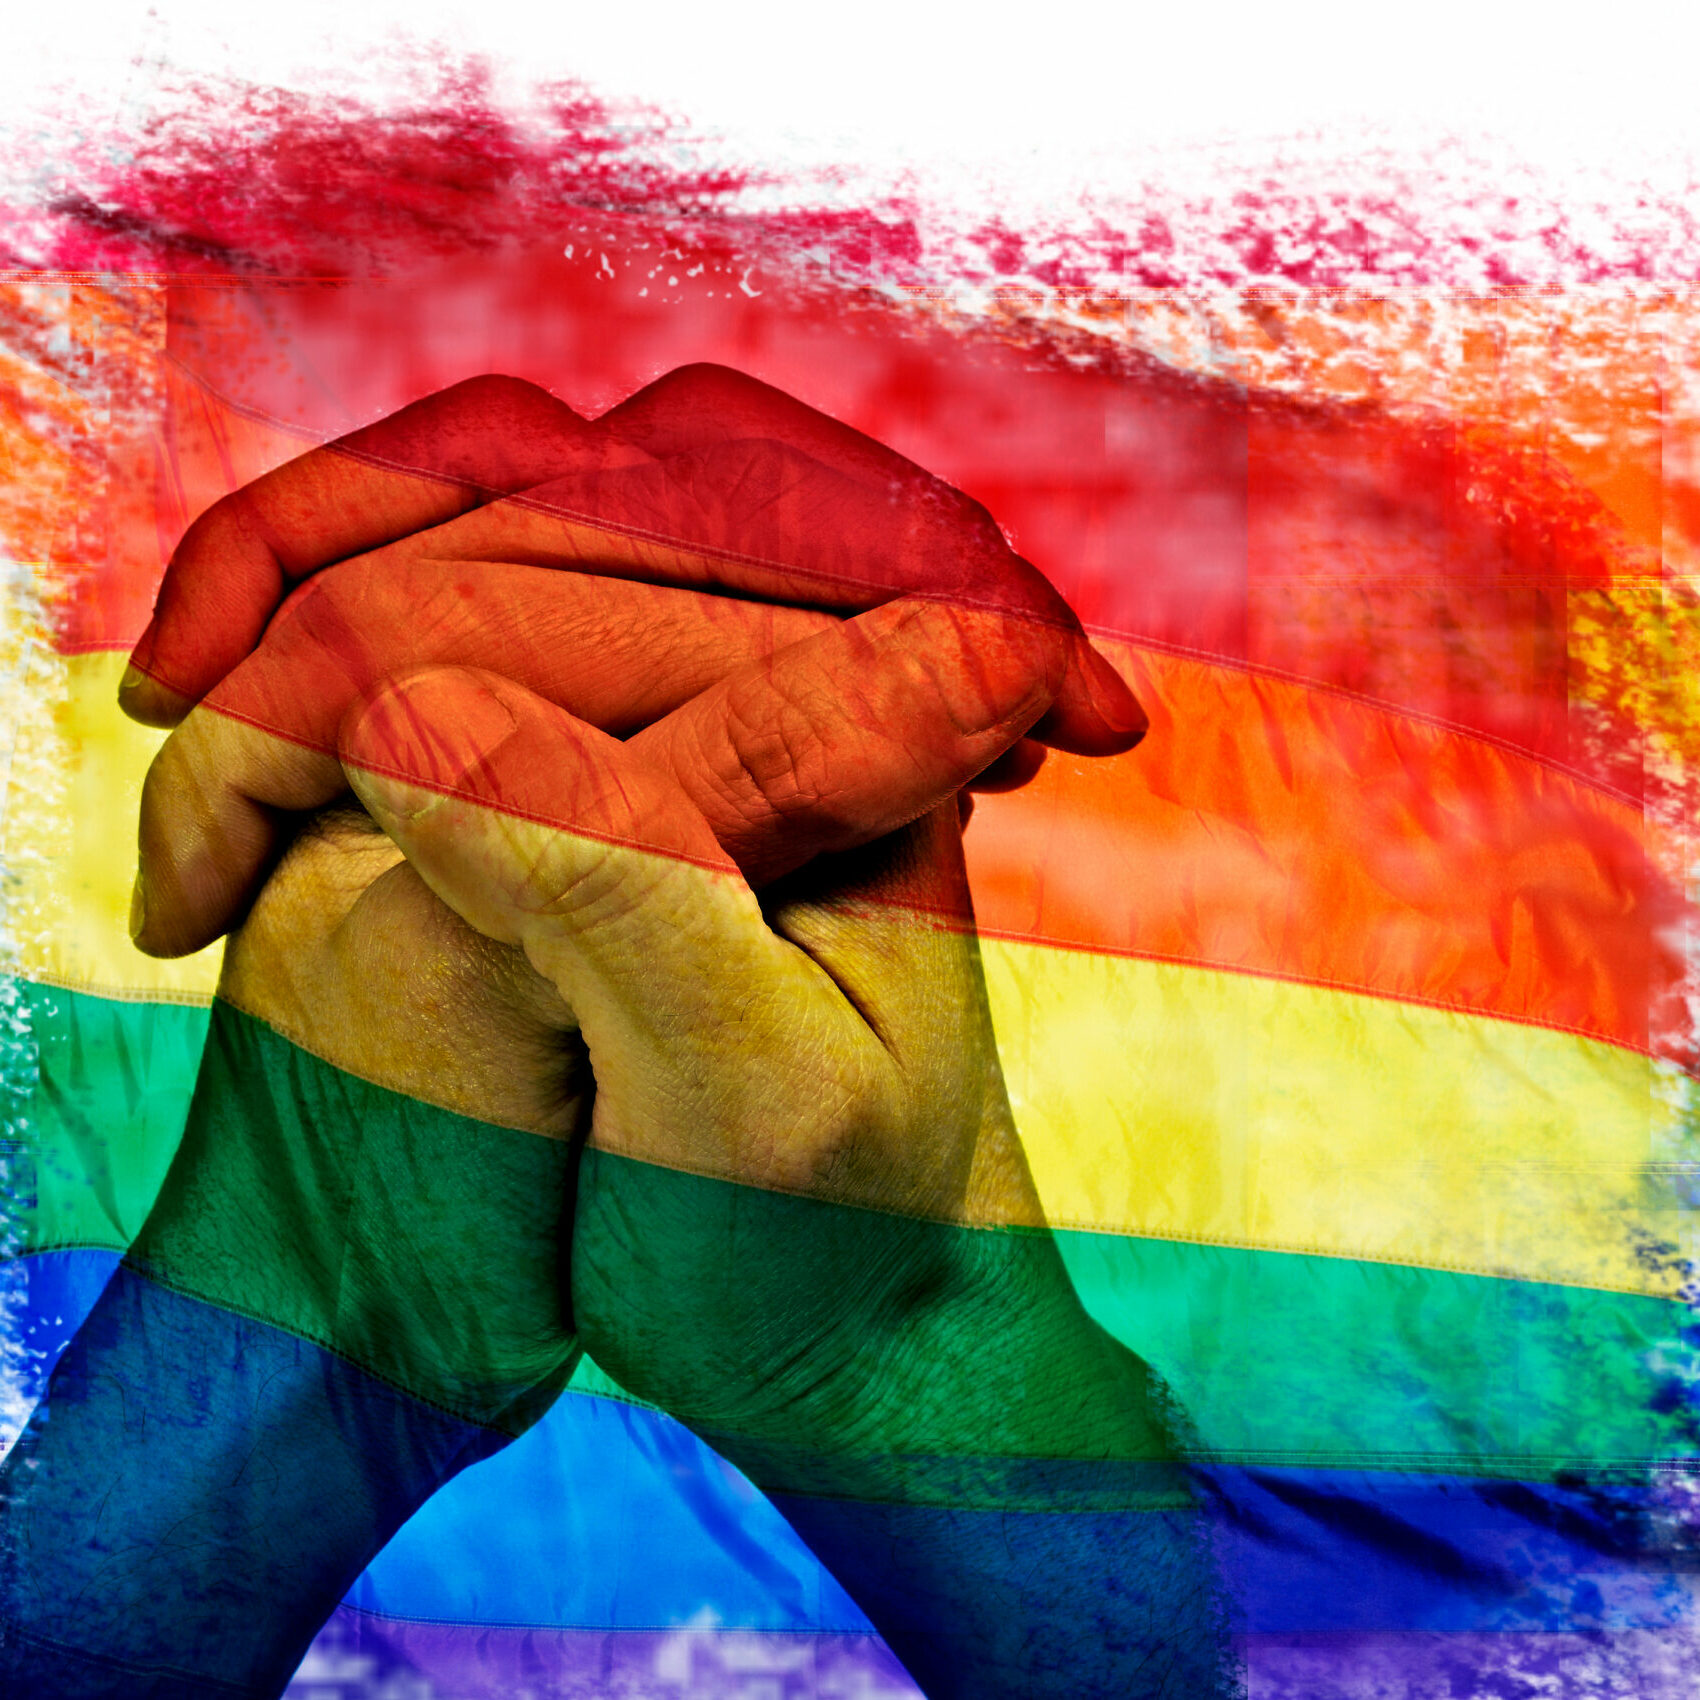 multiple exposures of the rainbow flag in different patterns and the clasped hands of a young man